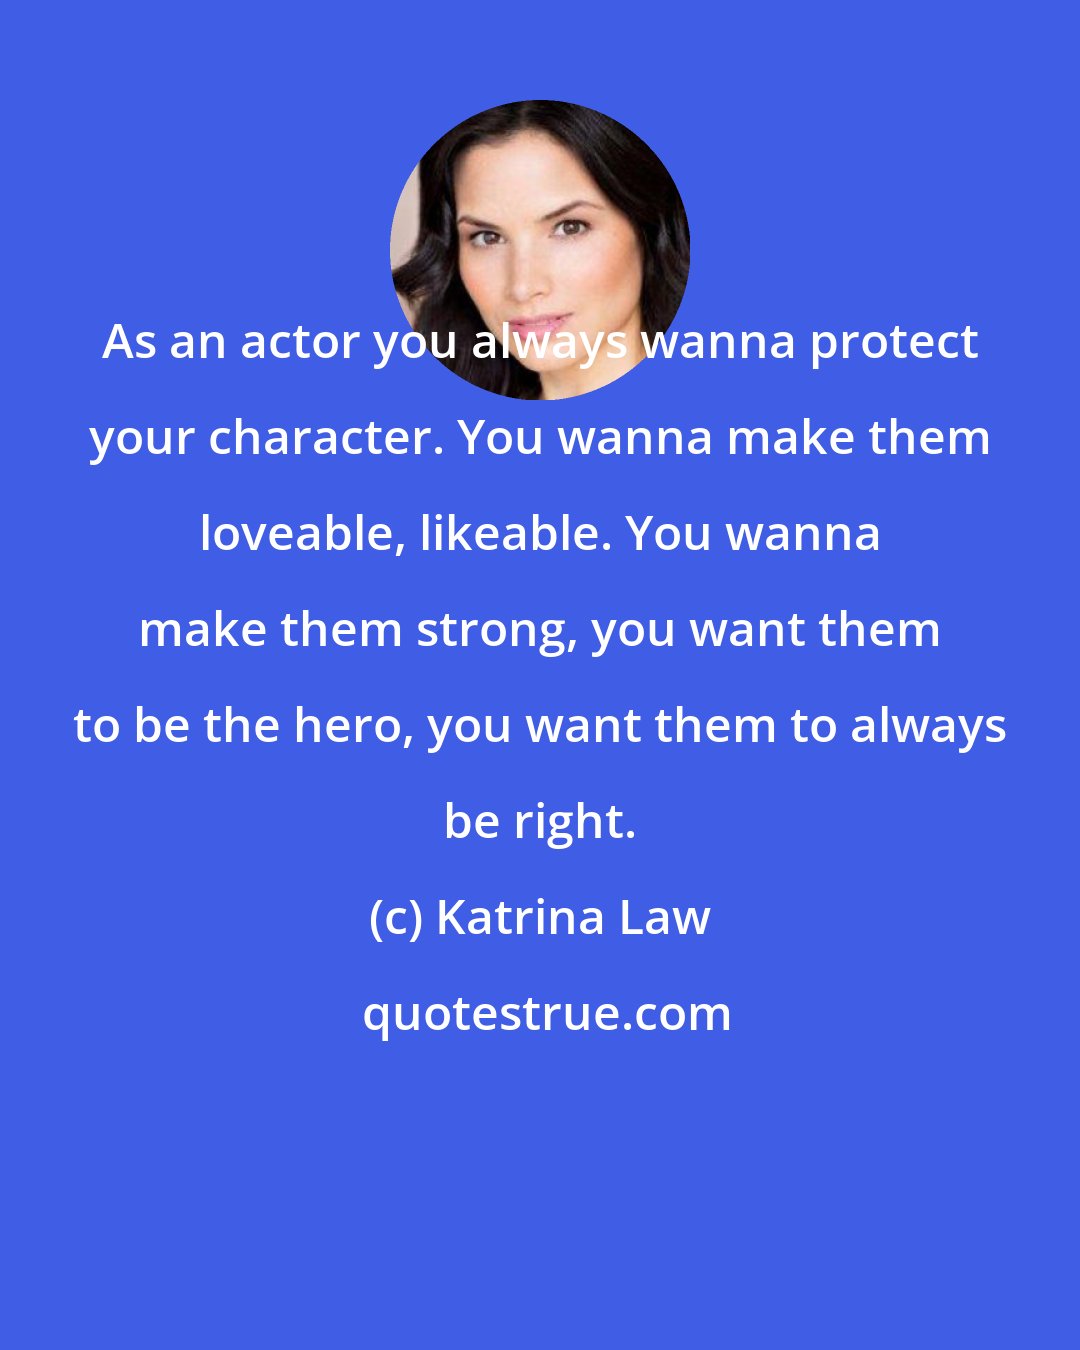 Katrina Law: As an actor you always wanna protect your character. You wanna make them loveable, likeable. You wanna make them strong, you want them to be the hero, you want them to always be right.